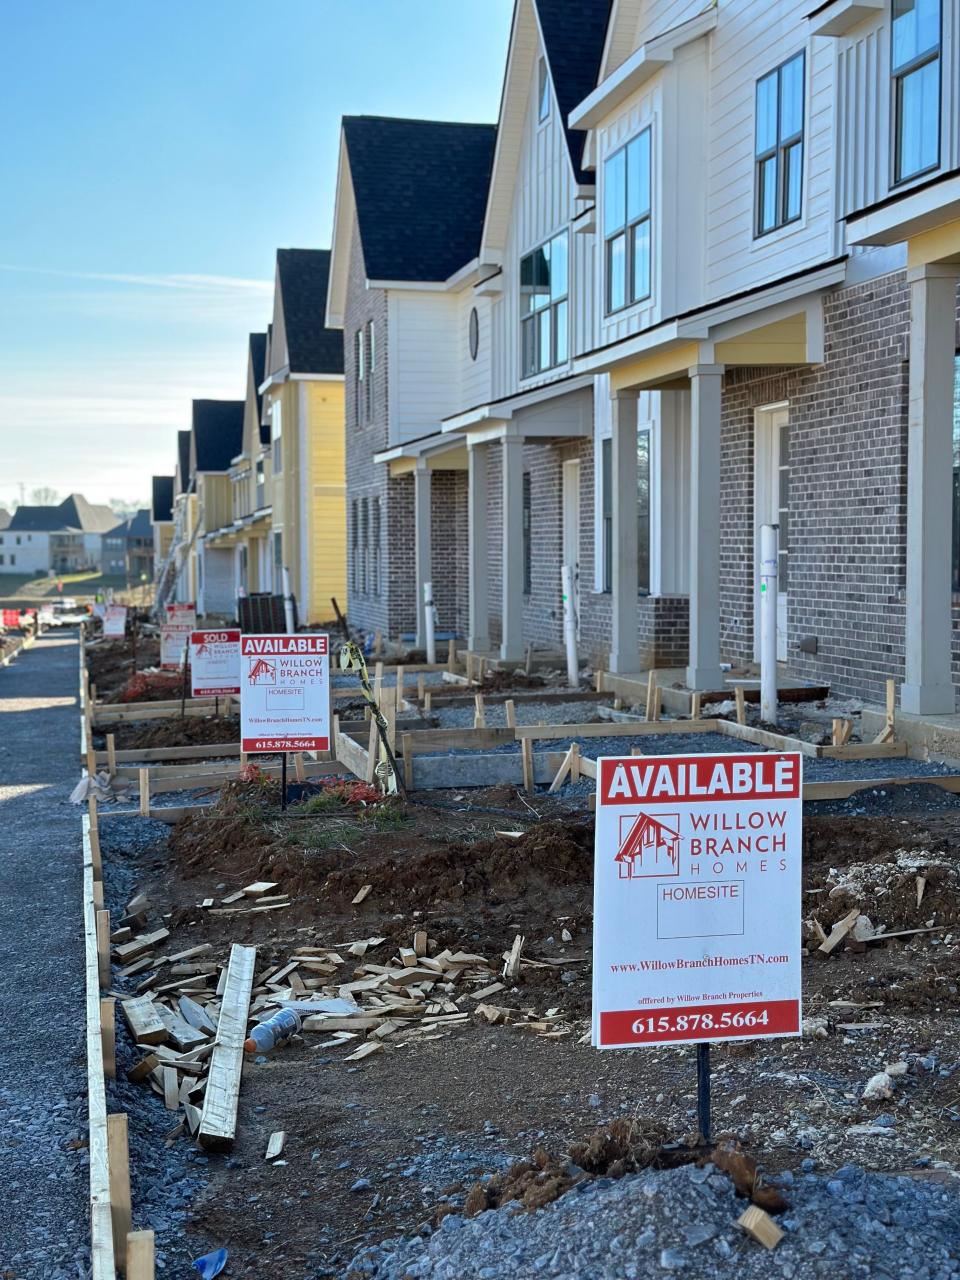 This row of new townhomes in the Canterbury neighborhood in Thompson's Station shows several available units. Just six months ago, inventory of single-family and townhome residences was scarce. Inventory looks to be a little more plentiful in 2023.